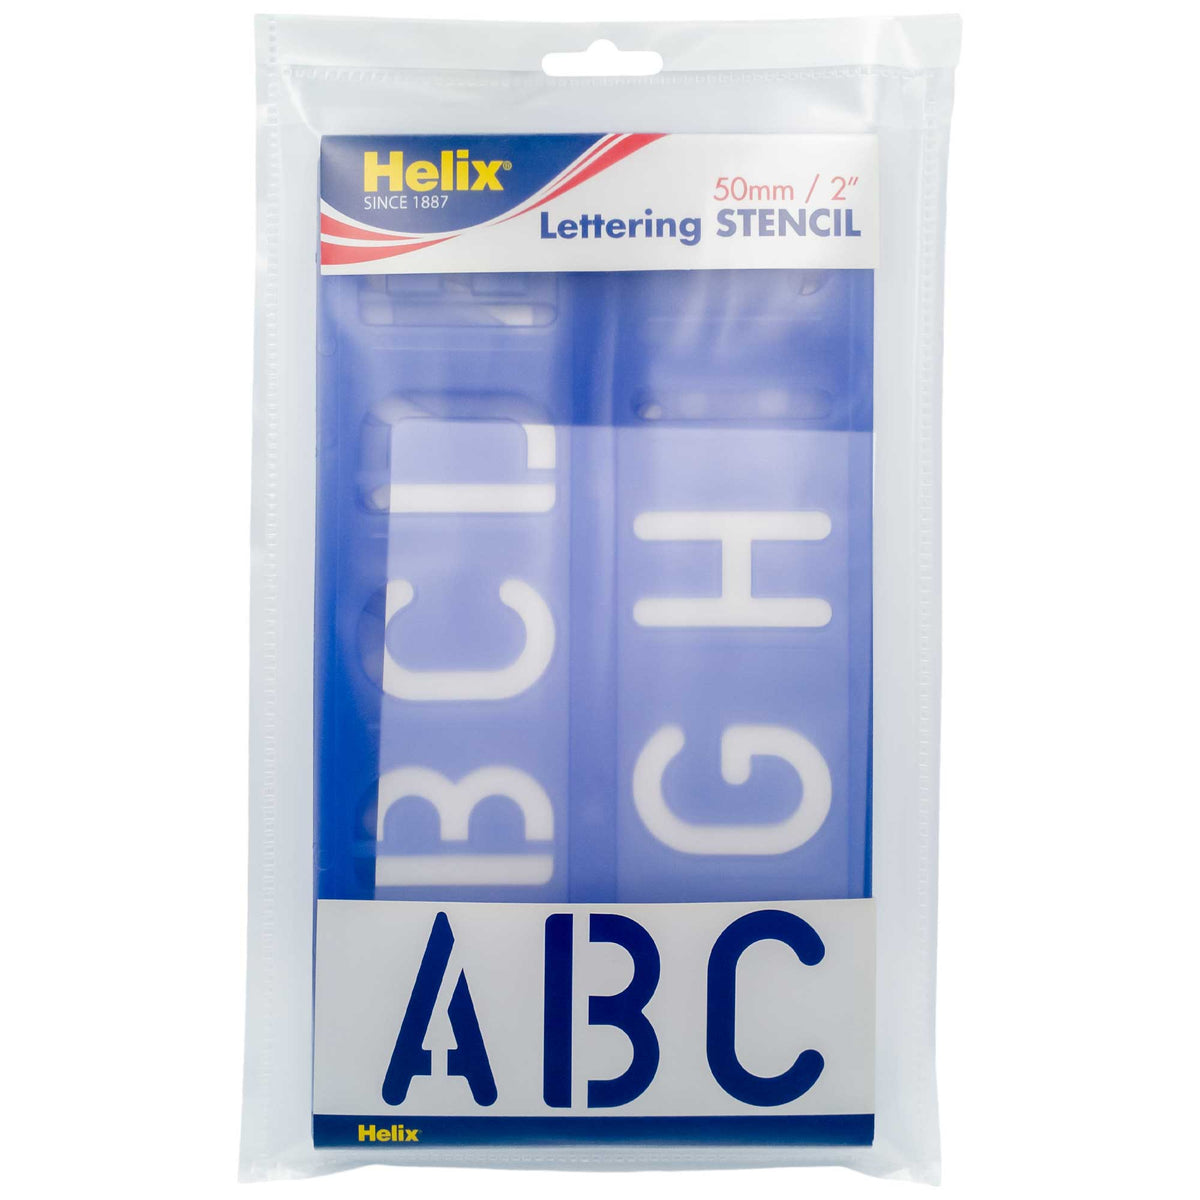 Helix Stencil Kits - Packaging